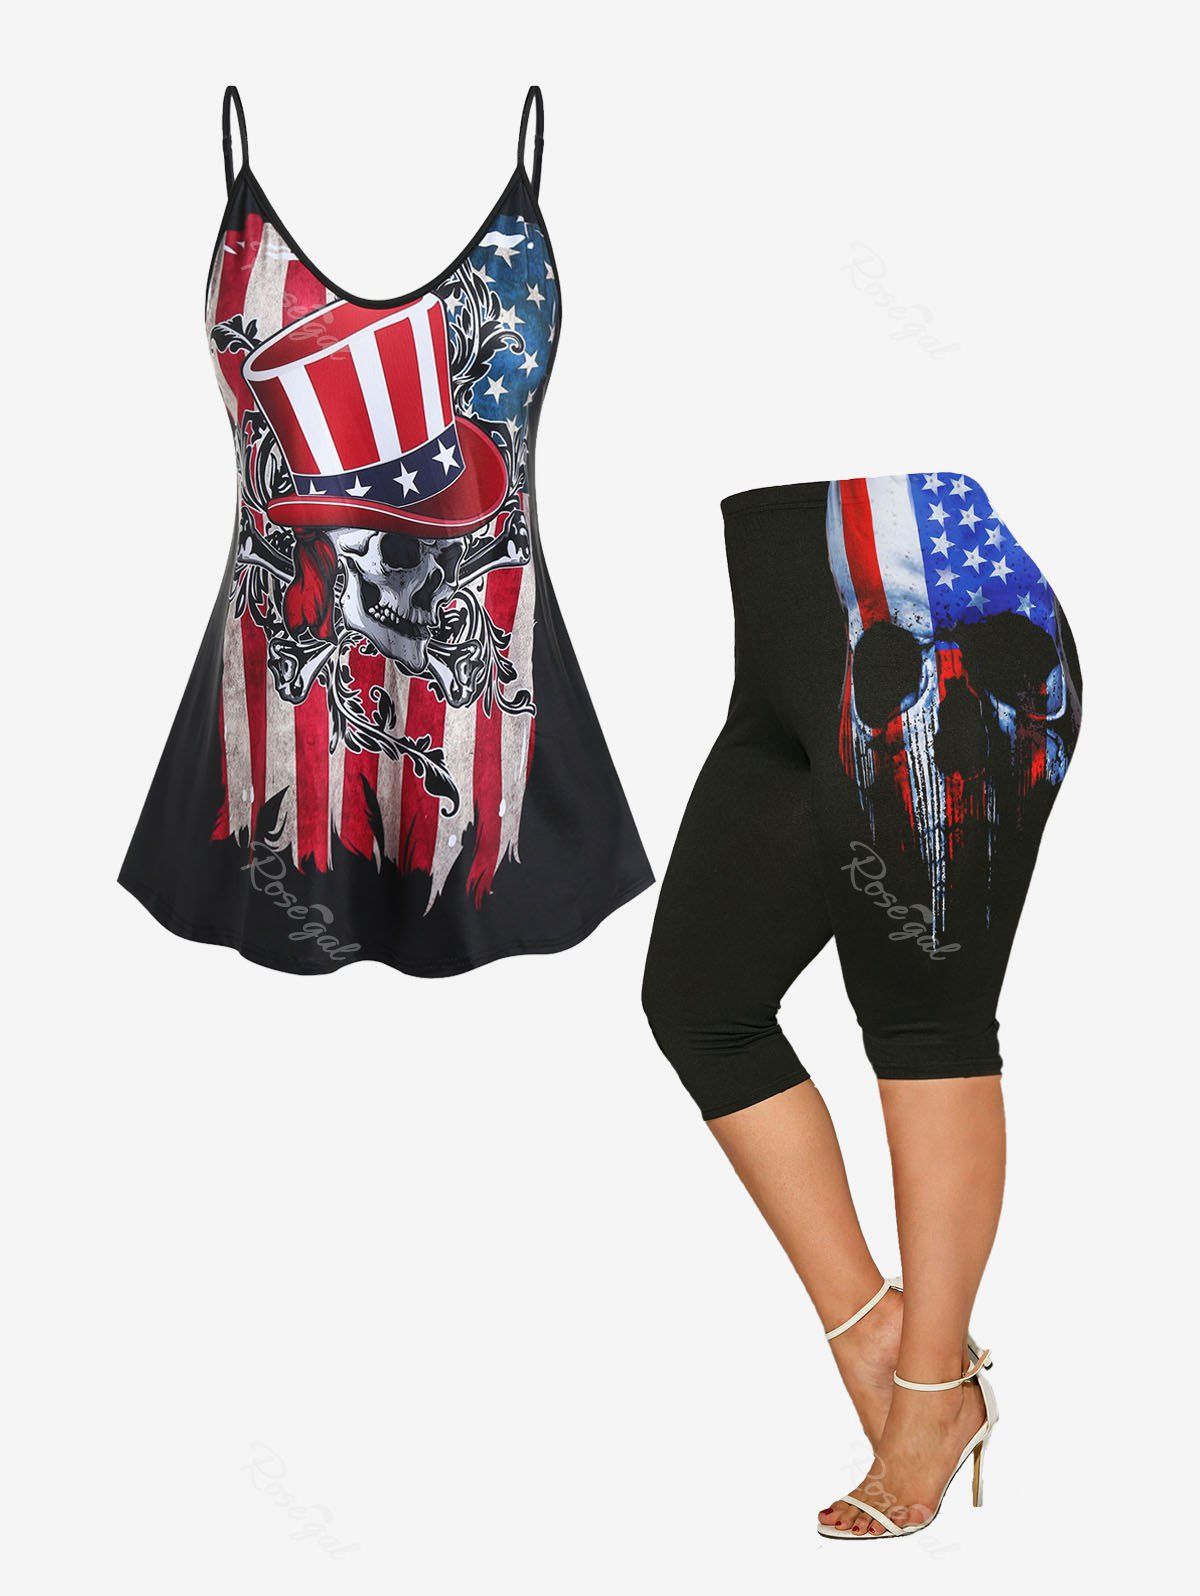 Shop American Flag Skull Print Gothic Tank Top and American Flag Skull Print Patriotic Capri Leggings Plus Size Summer Outfit  